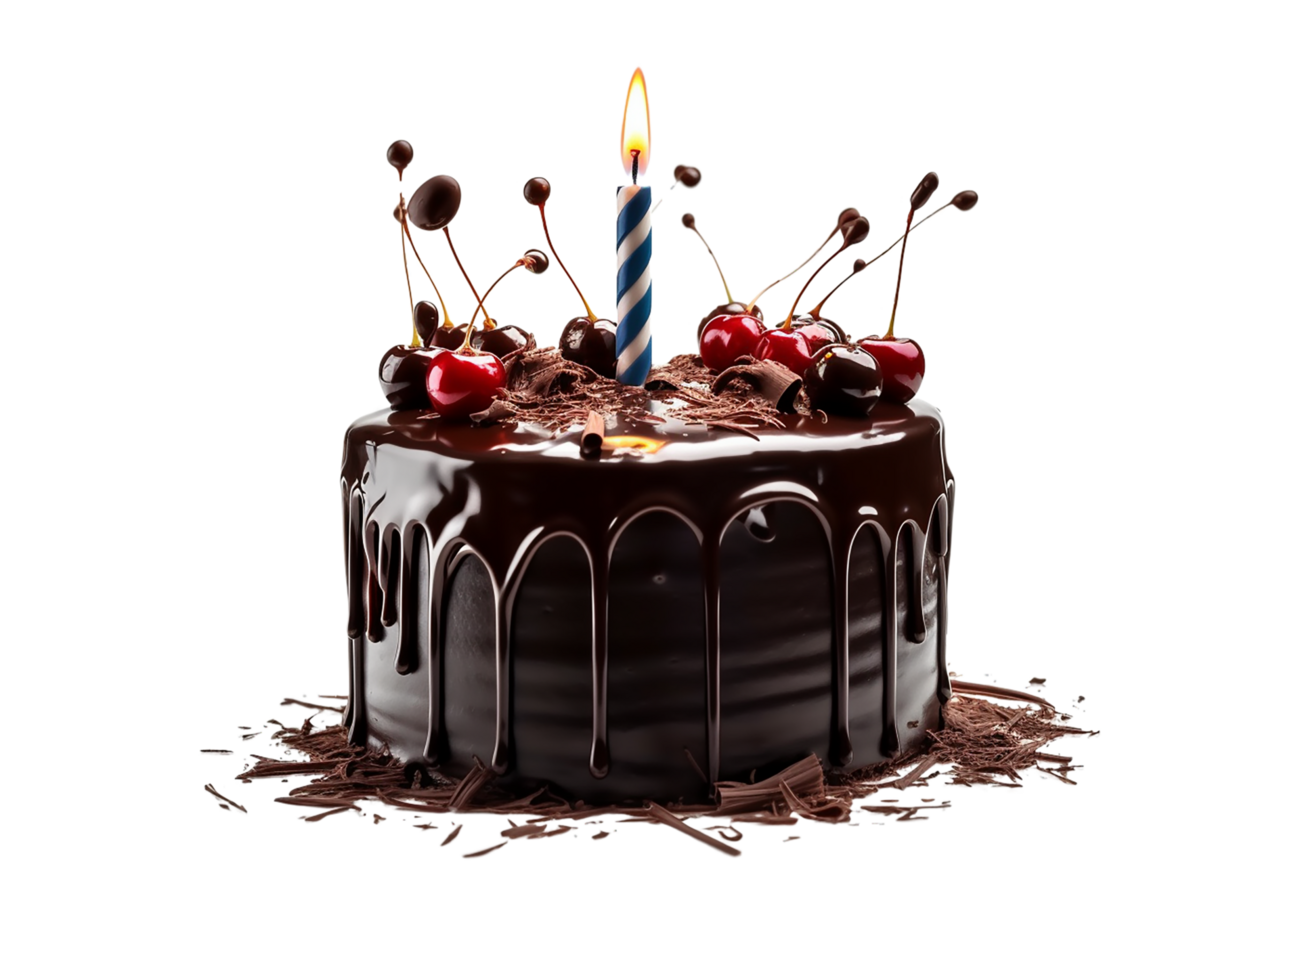 Fondant Cake PNG Picture And Clipart Image For Free Download - Lovepik |  401637855